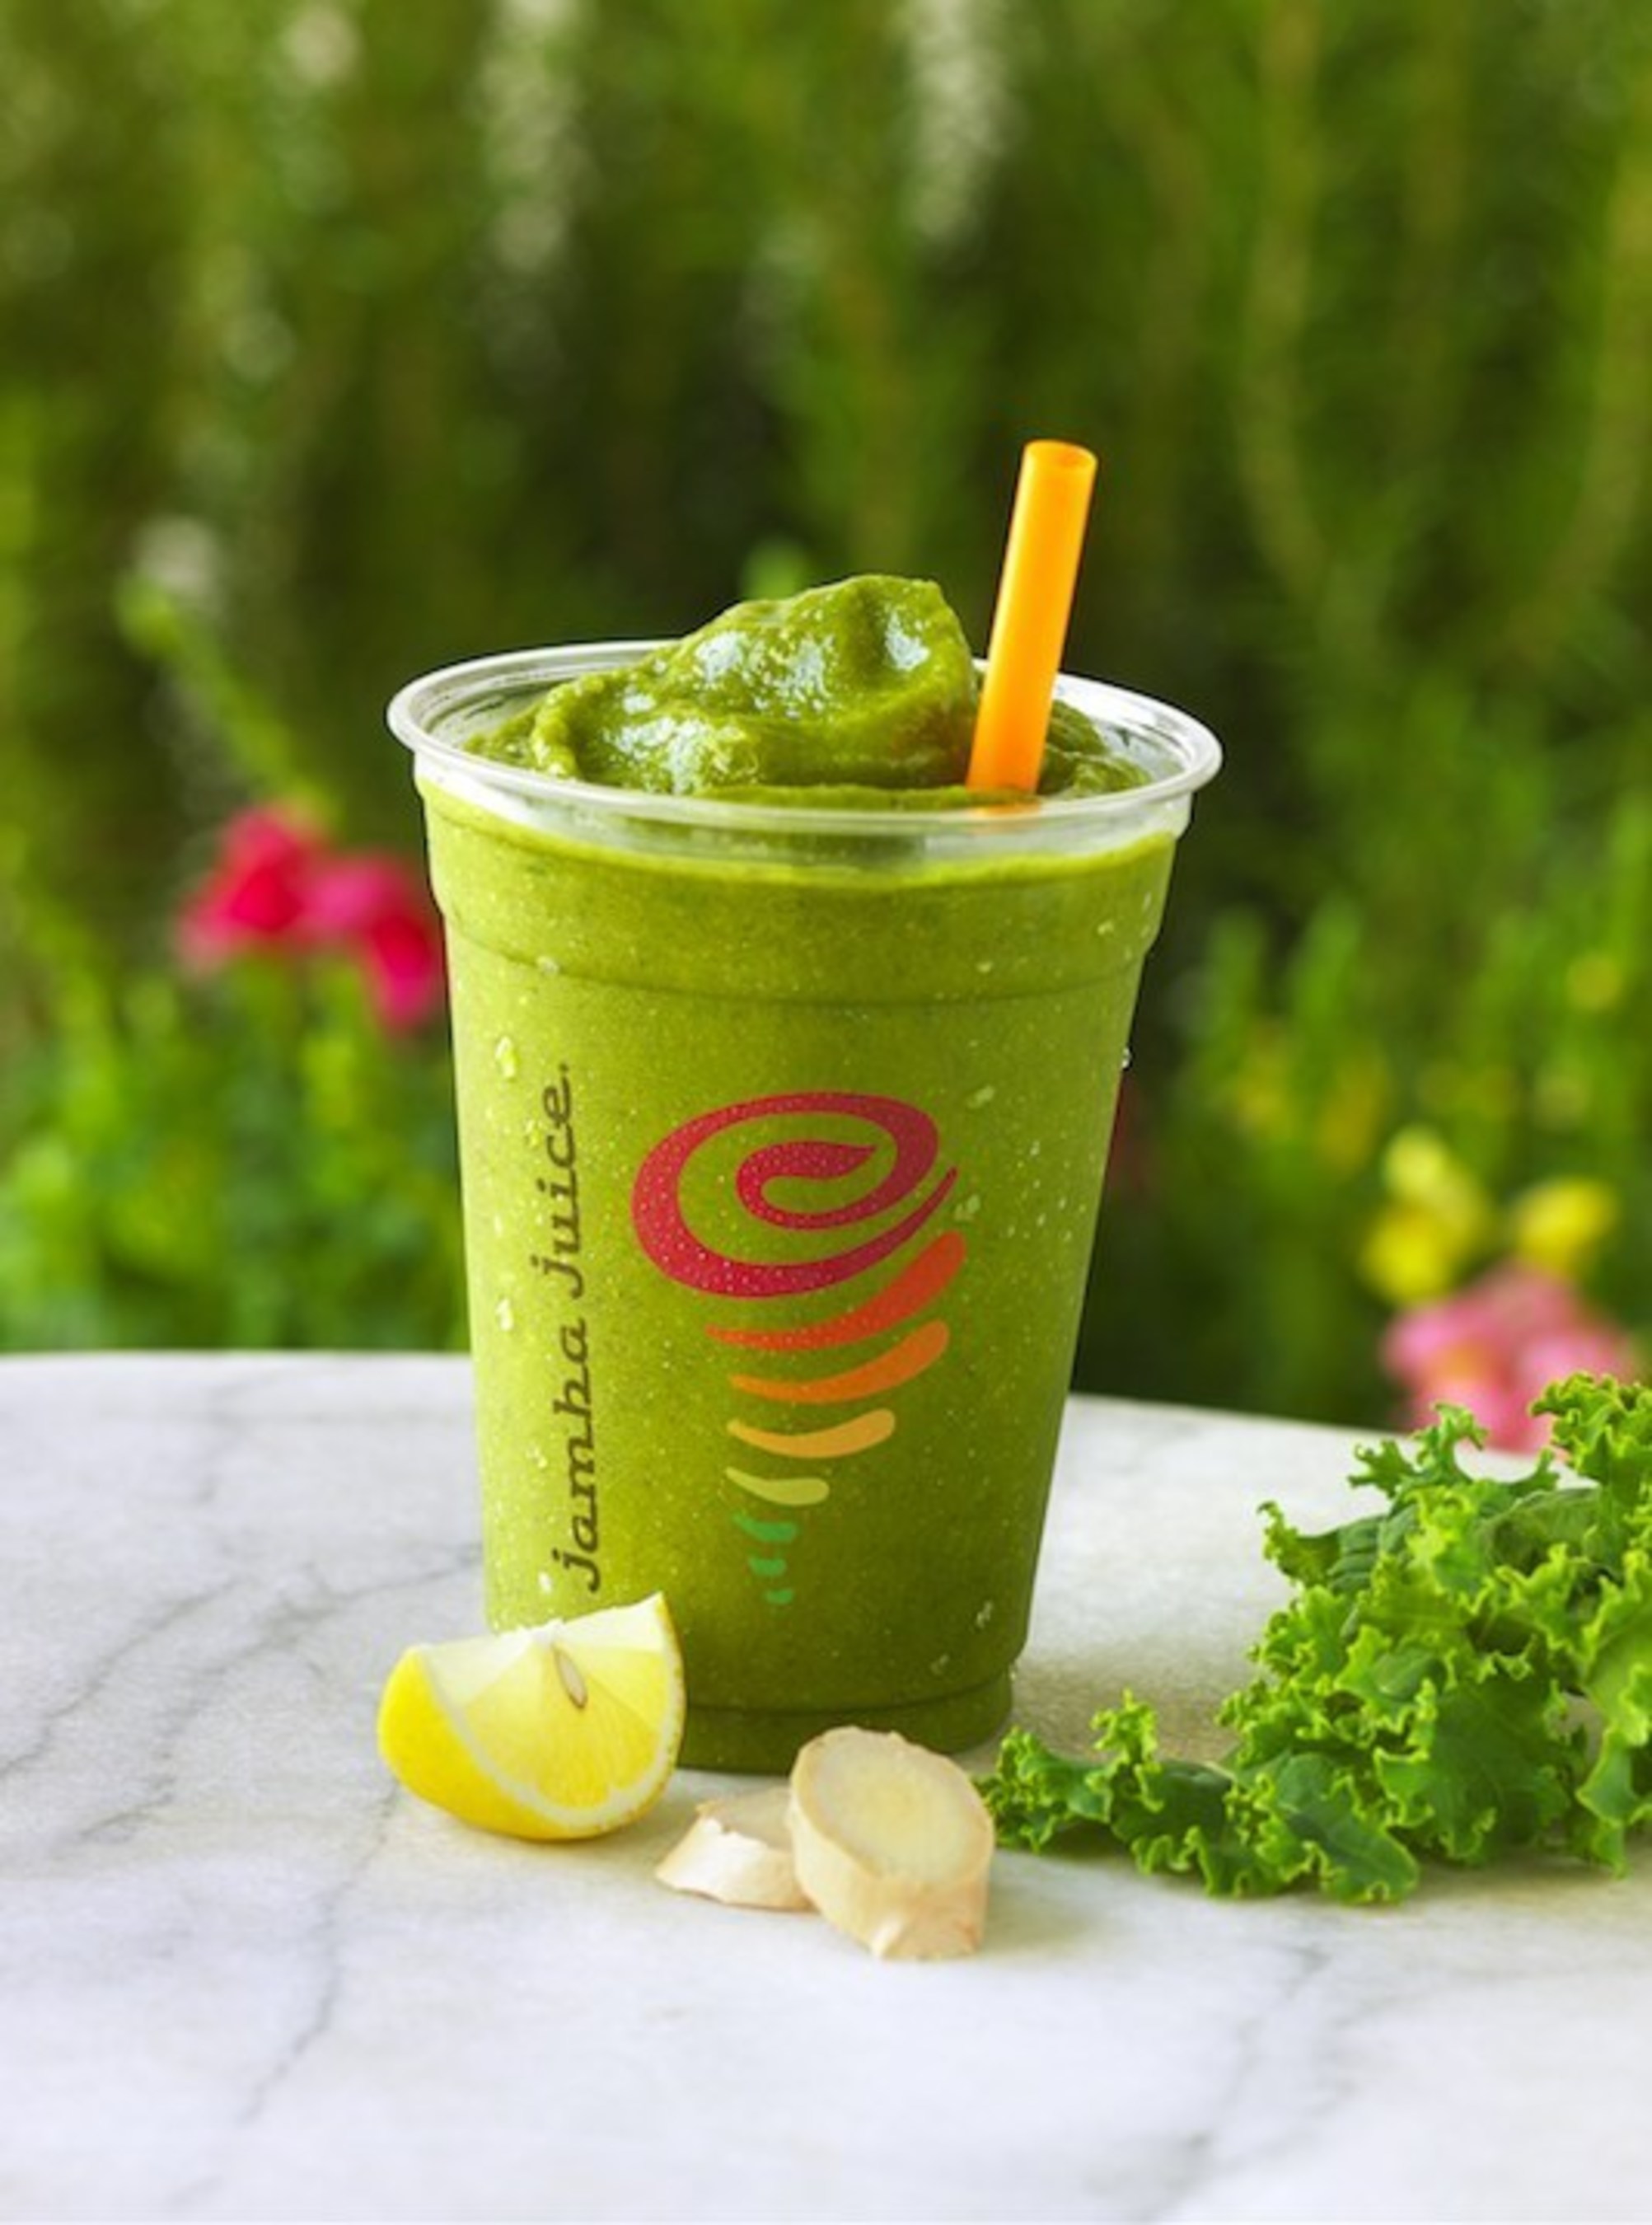 New Jamba Juice Greens 'n Ginger(TM): A beautiful blend of mangos, peaches, kale, lemon, and ginger puree that is an excellent source of Vitamin A, Vitamin C, Folate, B6, and Vitamin K. Greens 'n Ginger joins Berry  UpBeet(TM), Apple n Greens(TM), Orange Carrot Karma(TM), and Tropical Harvest(TM) in the Fruit & Veggie line, offering great-tasting and convenient ways for those looking to get in their daily servings of fruits and vegetables.